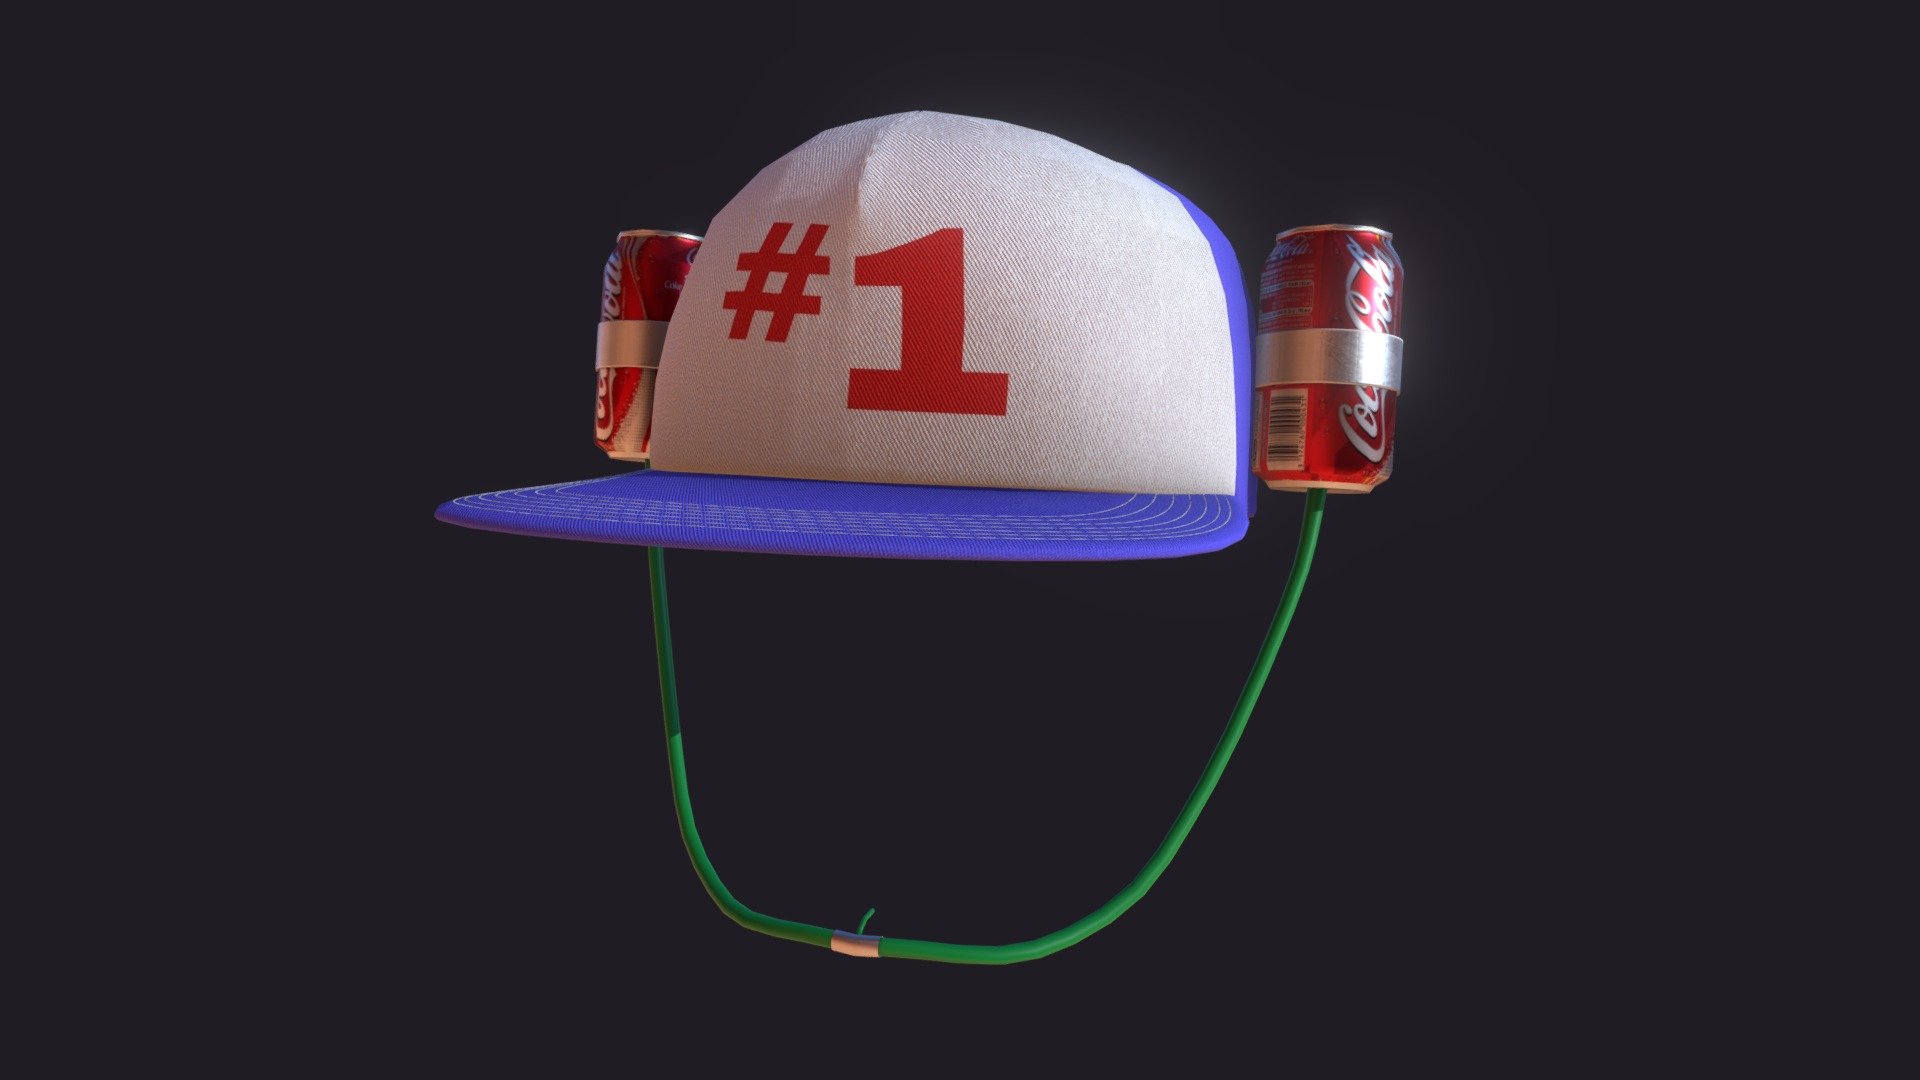 Model made in blender and texturized in substance painter. All textures are included.

-Single Texture 4k (Pepsi, Coca Cola, Sponge Bob version)
-OBJ
-FBX
-Blender File - Cap - Hat #1 4k - Buy Royalty Free 3D model by DrFeelgood (@dr.feelgood) 3d model